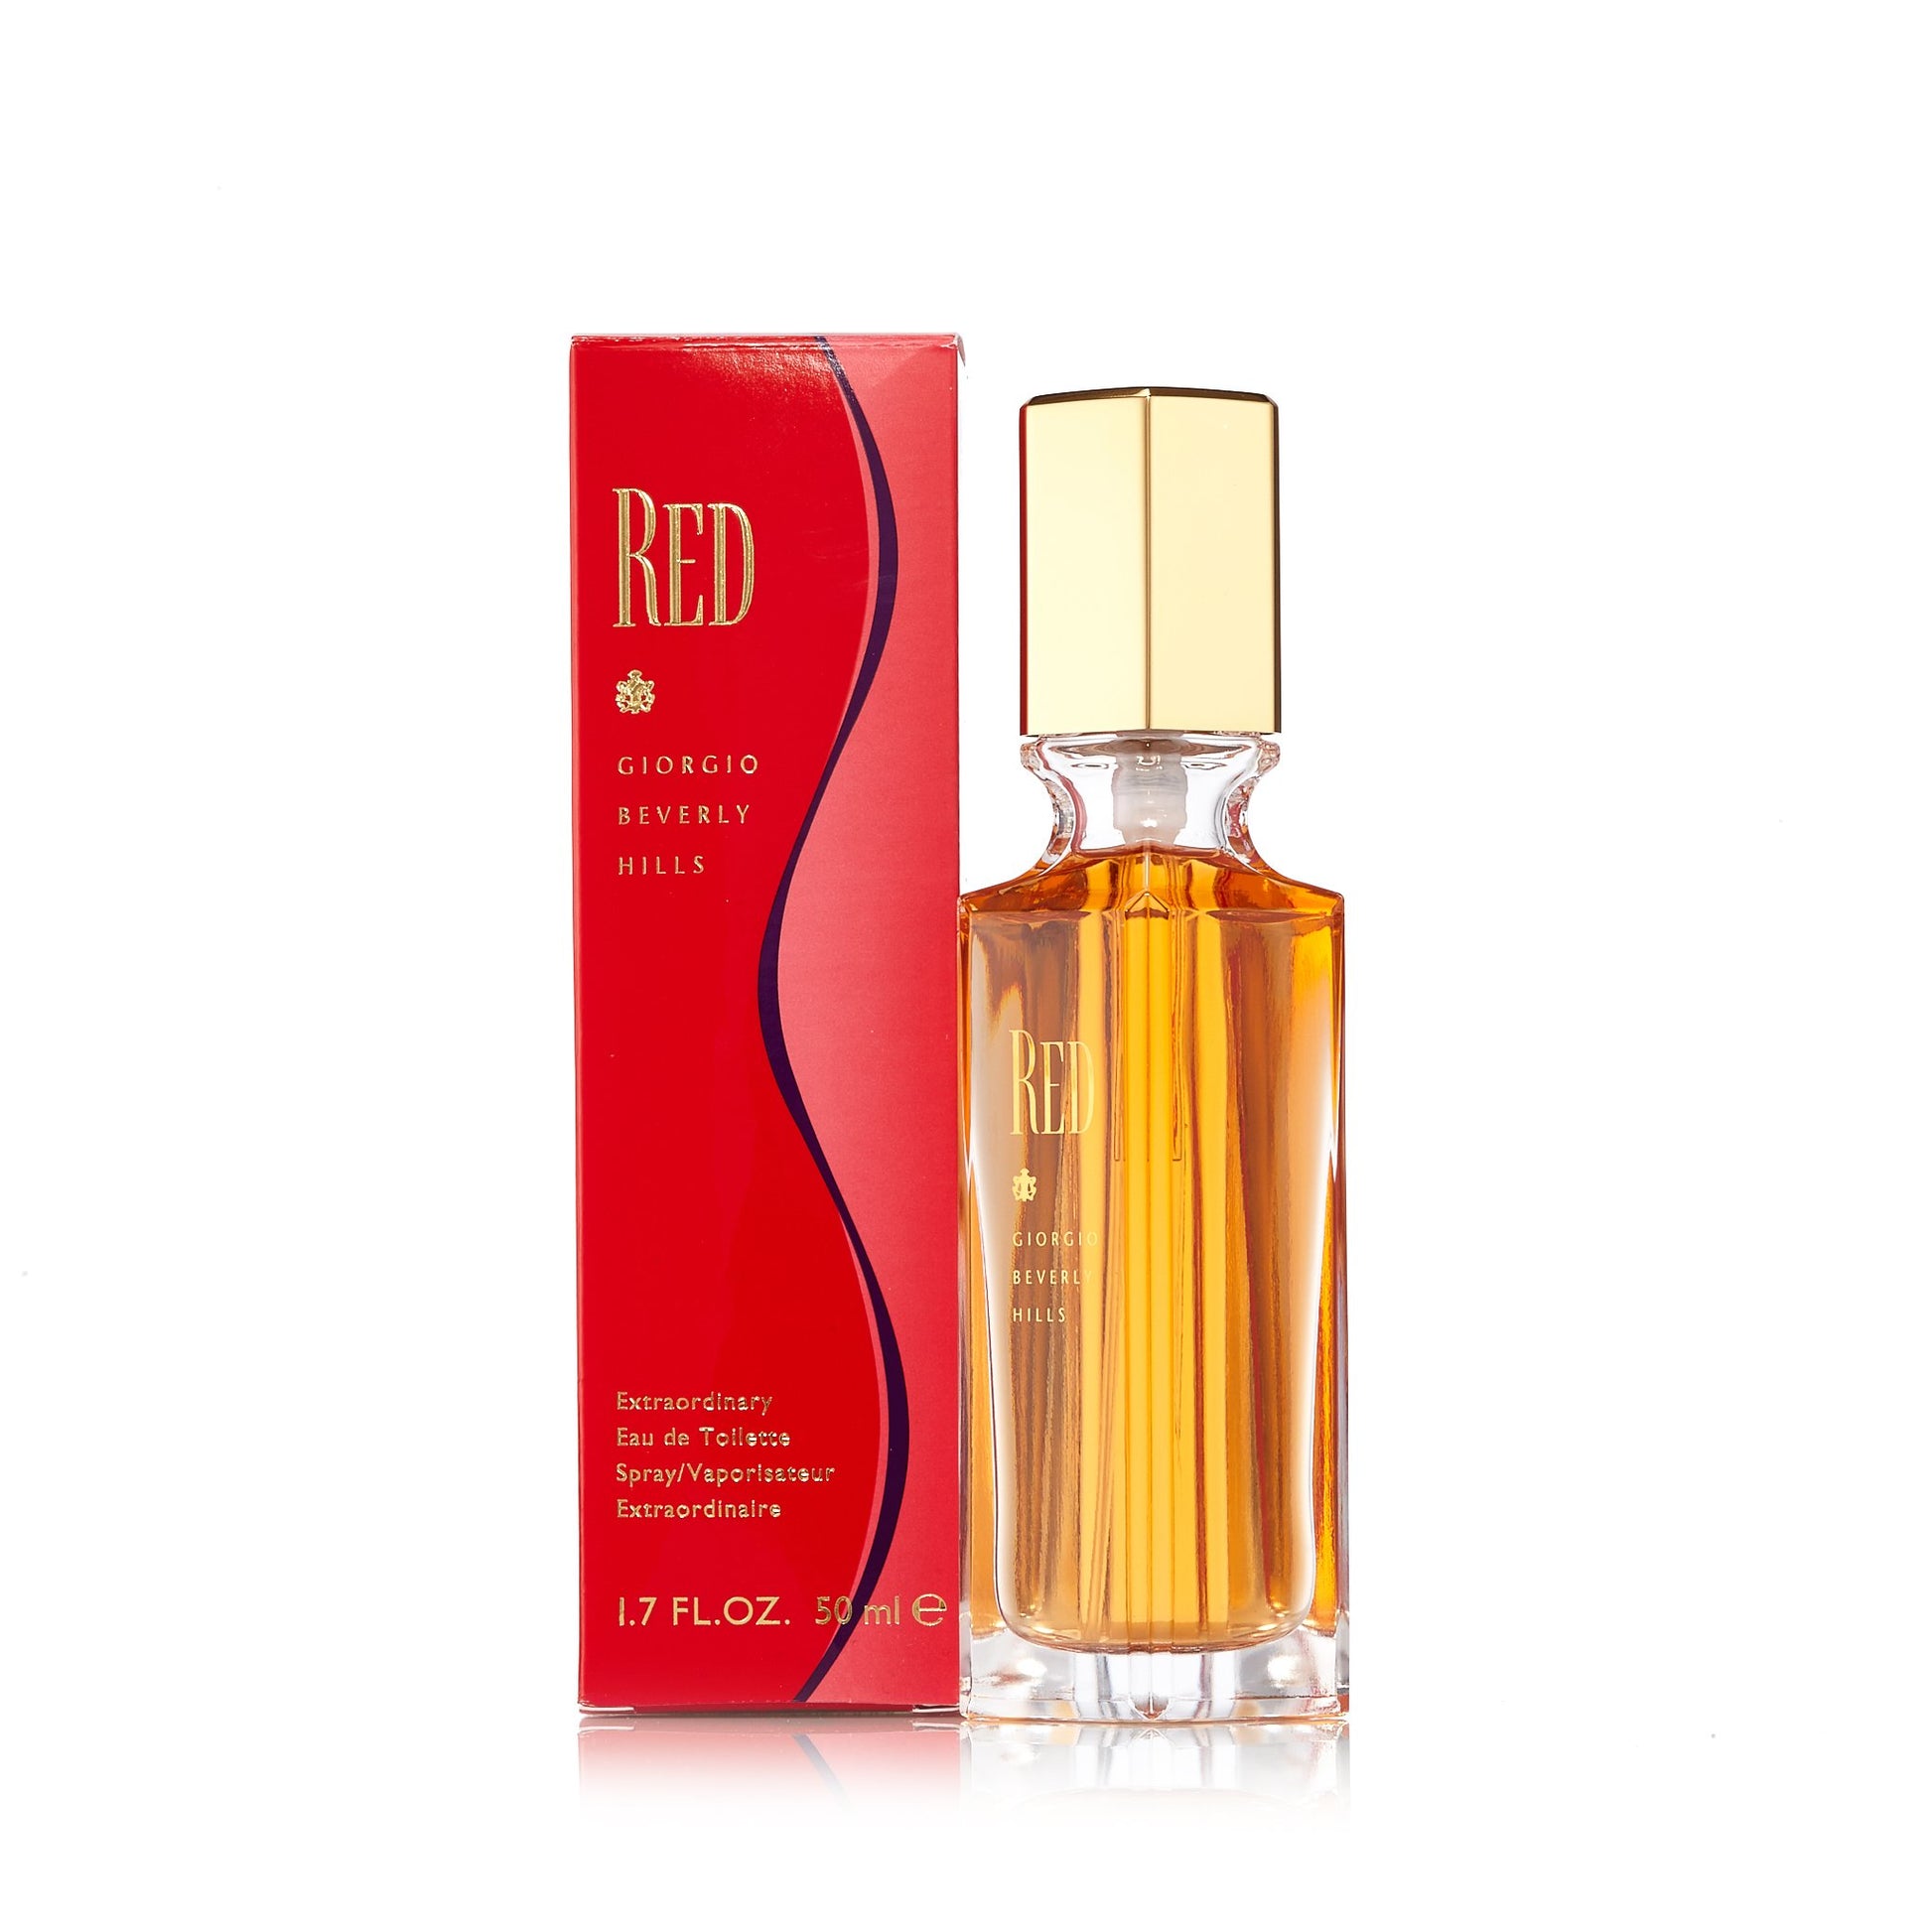 Red Giorgio Eau de Toilette Spray for Women by Beverly Hills 1.7 oz. Click to open in modal